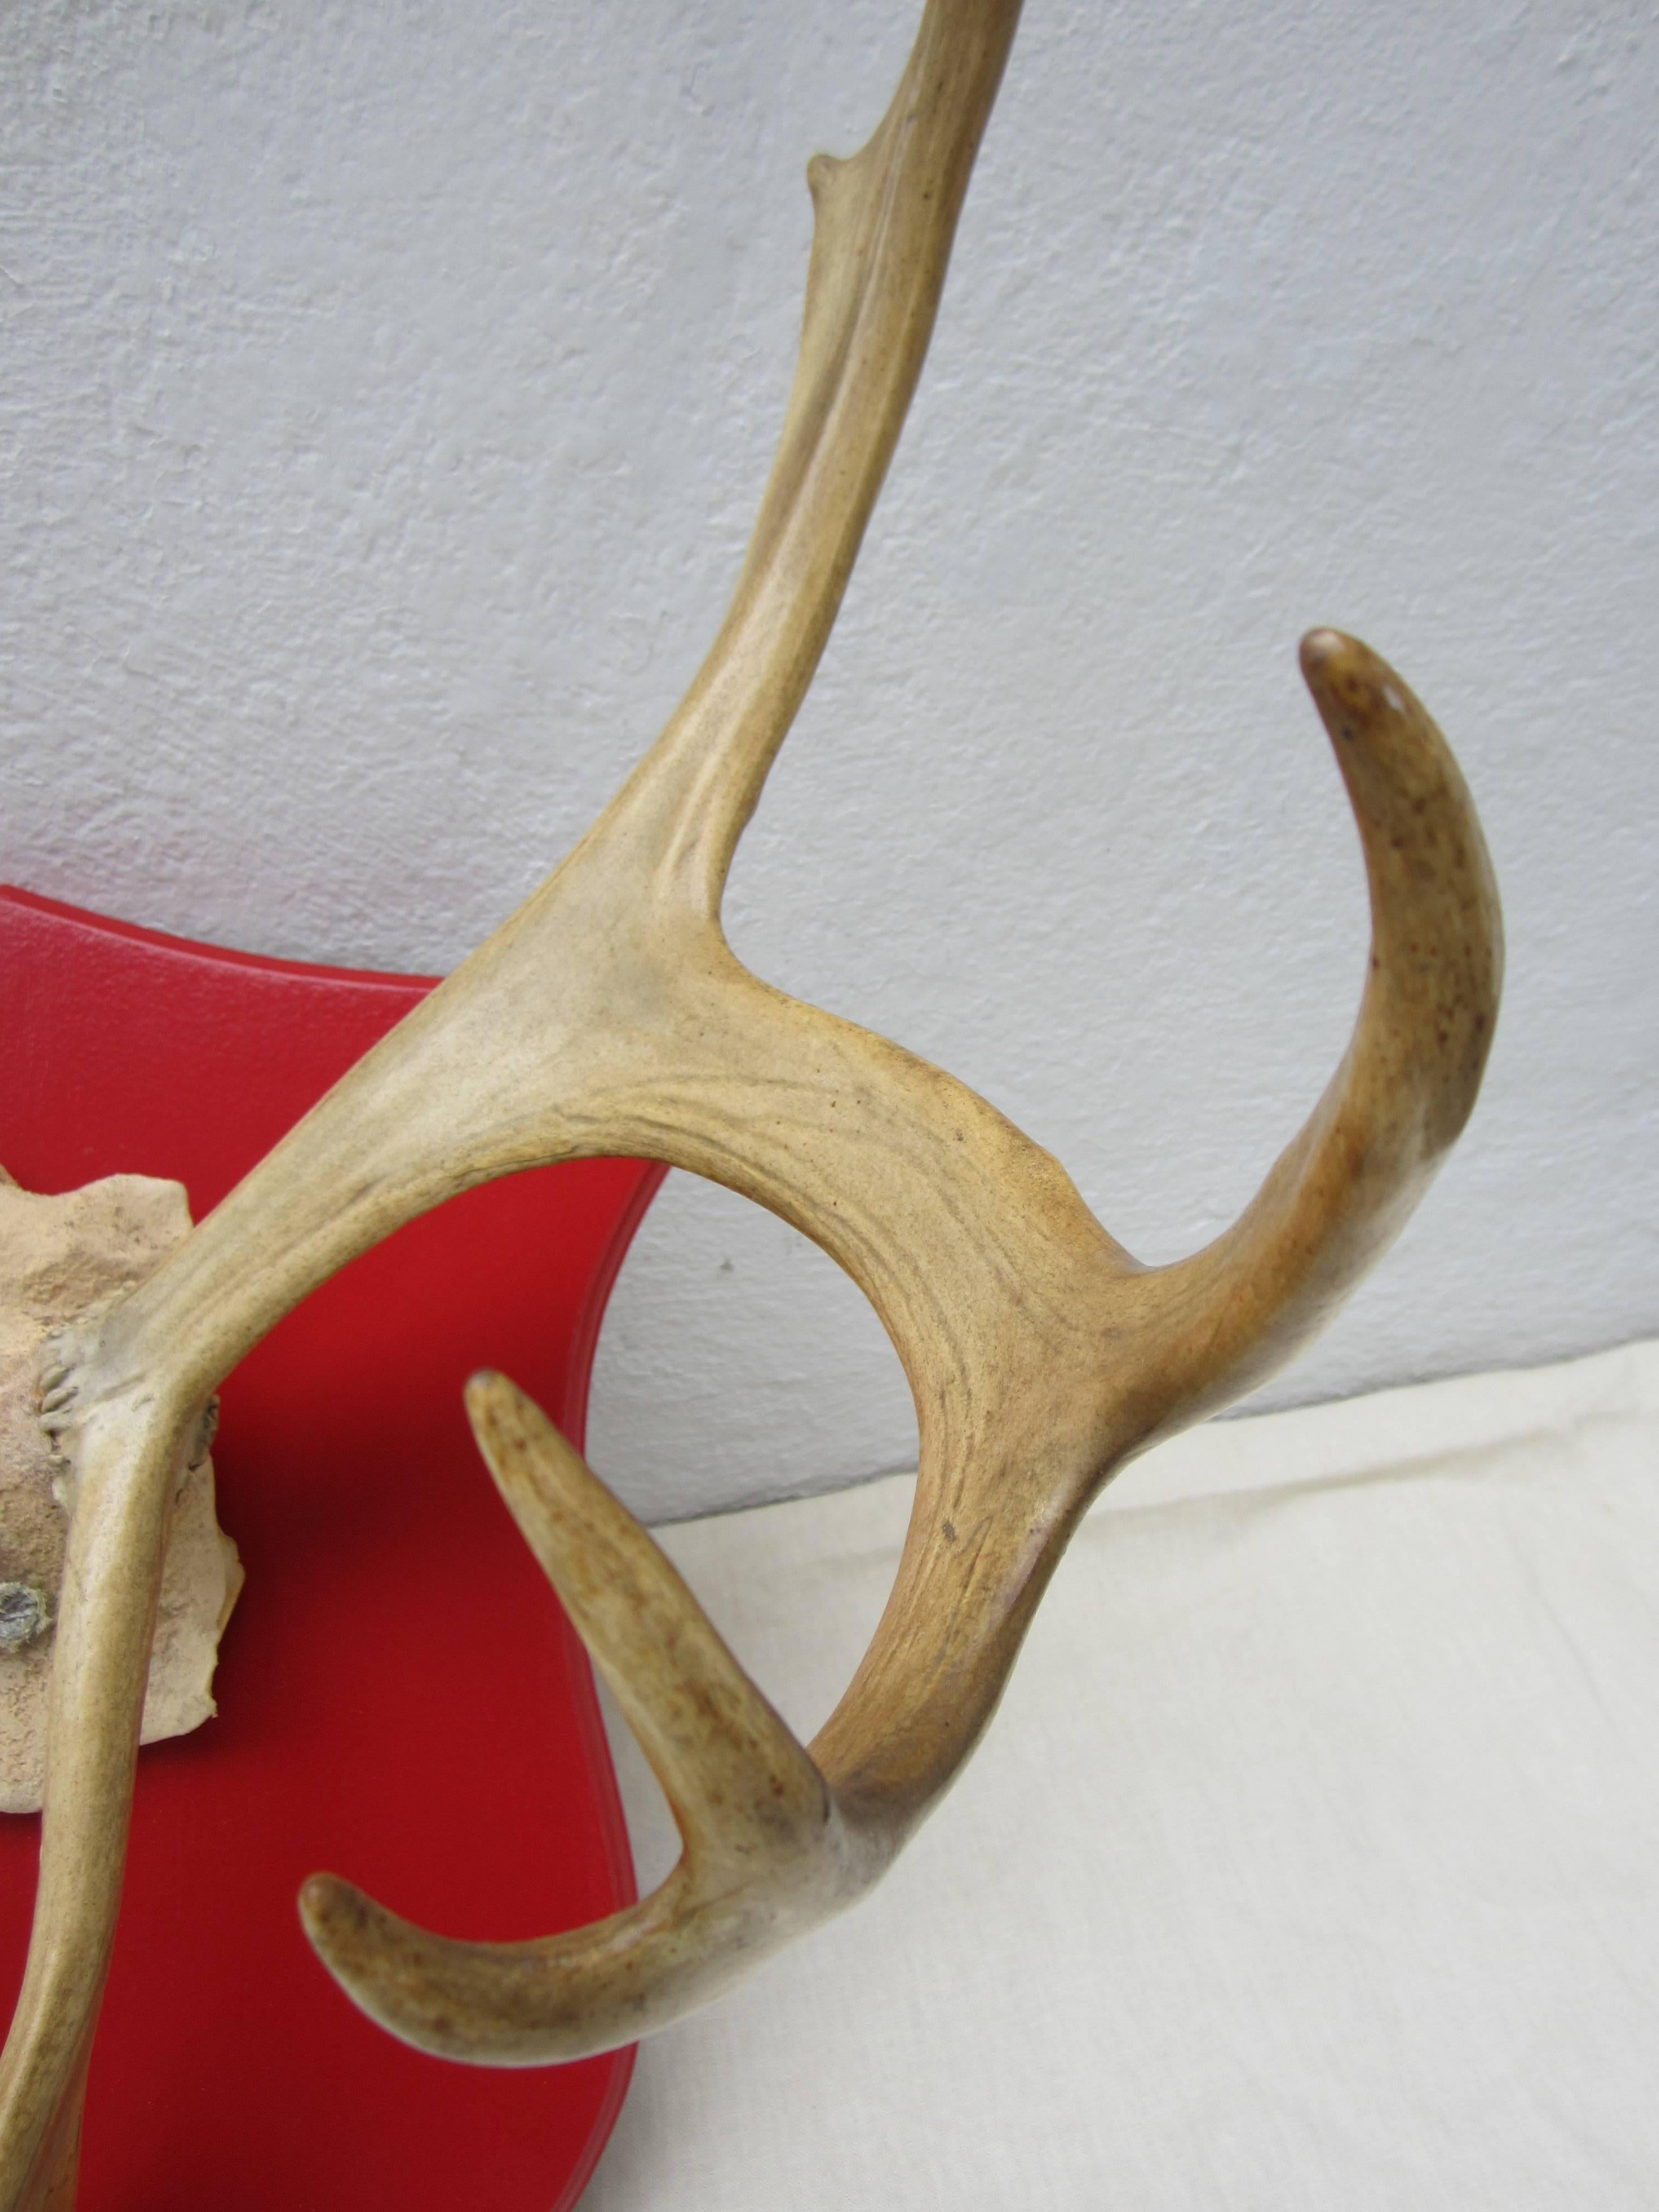 Set of large caribou antlers mounted on wood wall plaque pained in high gloss red.